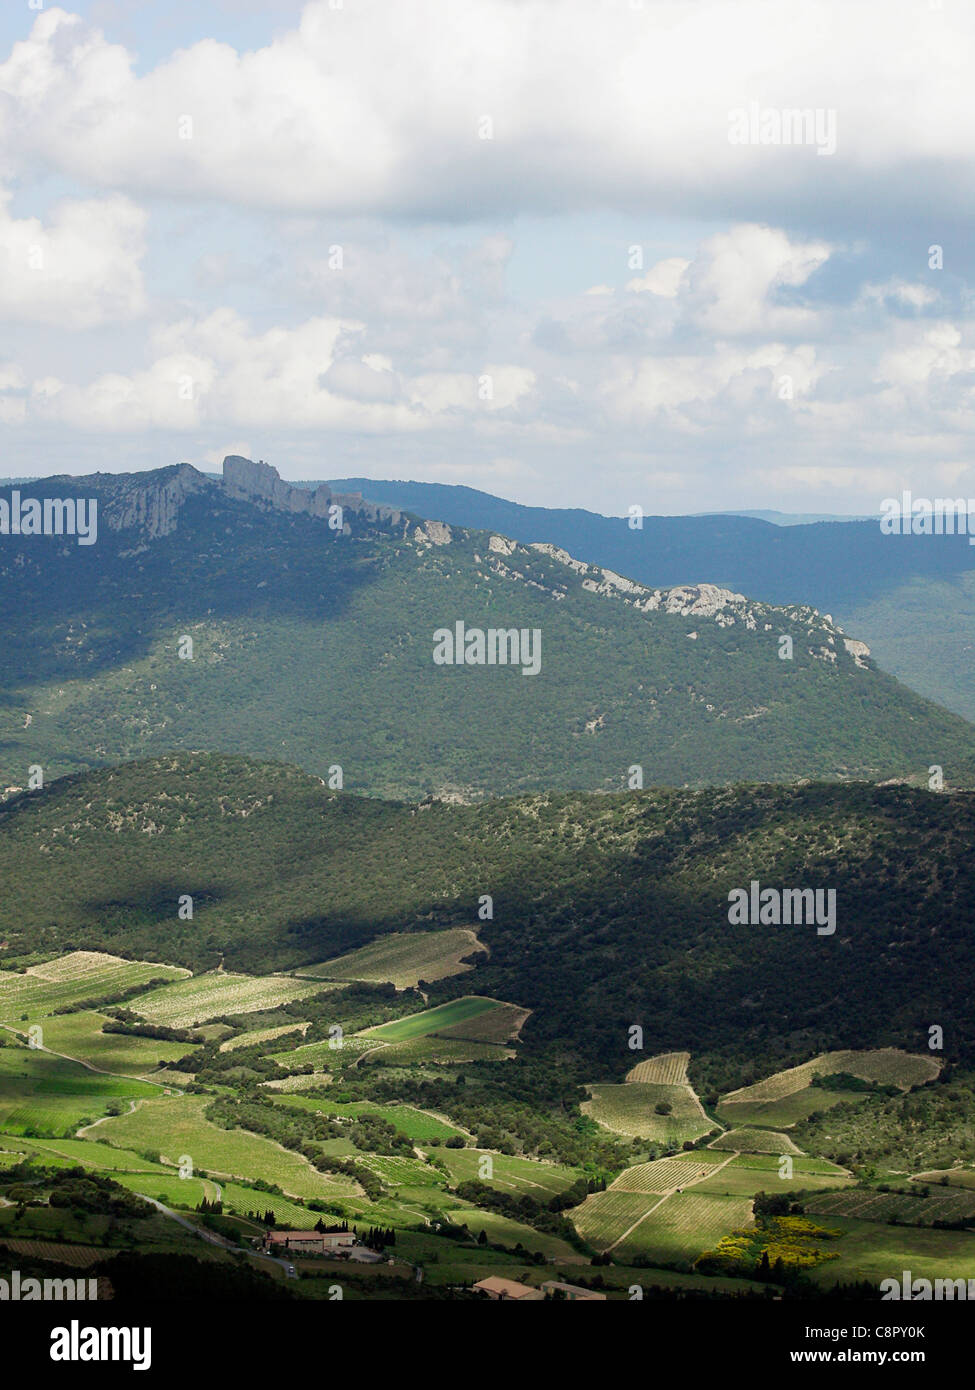 France, Languedoc-Roussillon, Aude, view towards Peyrepertuse Castle, one of the Cathar castles Stock Photo